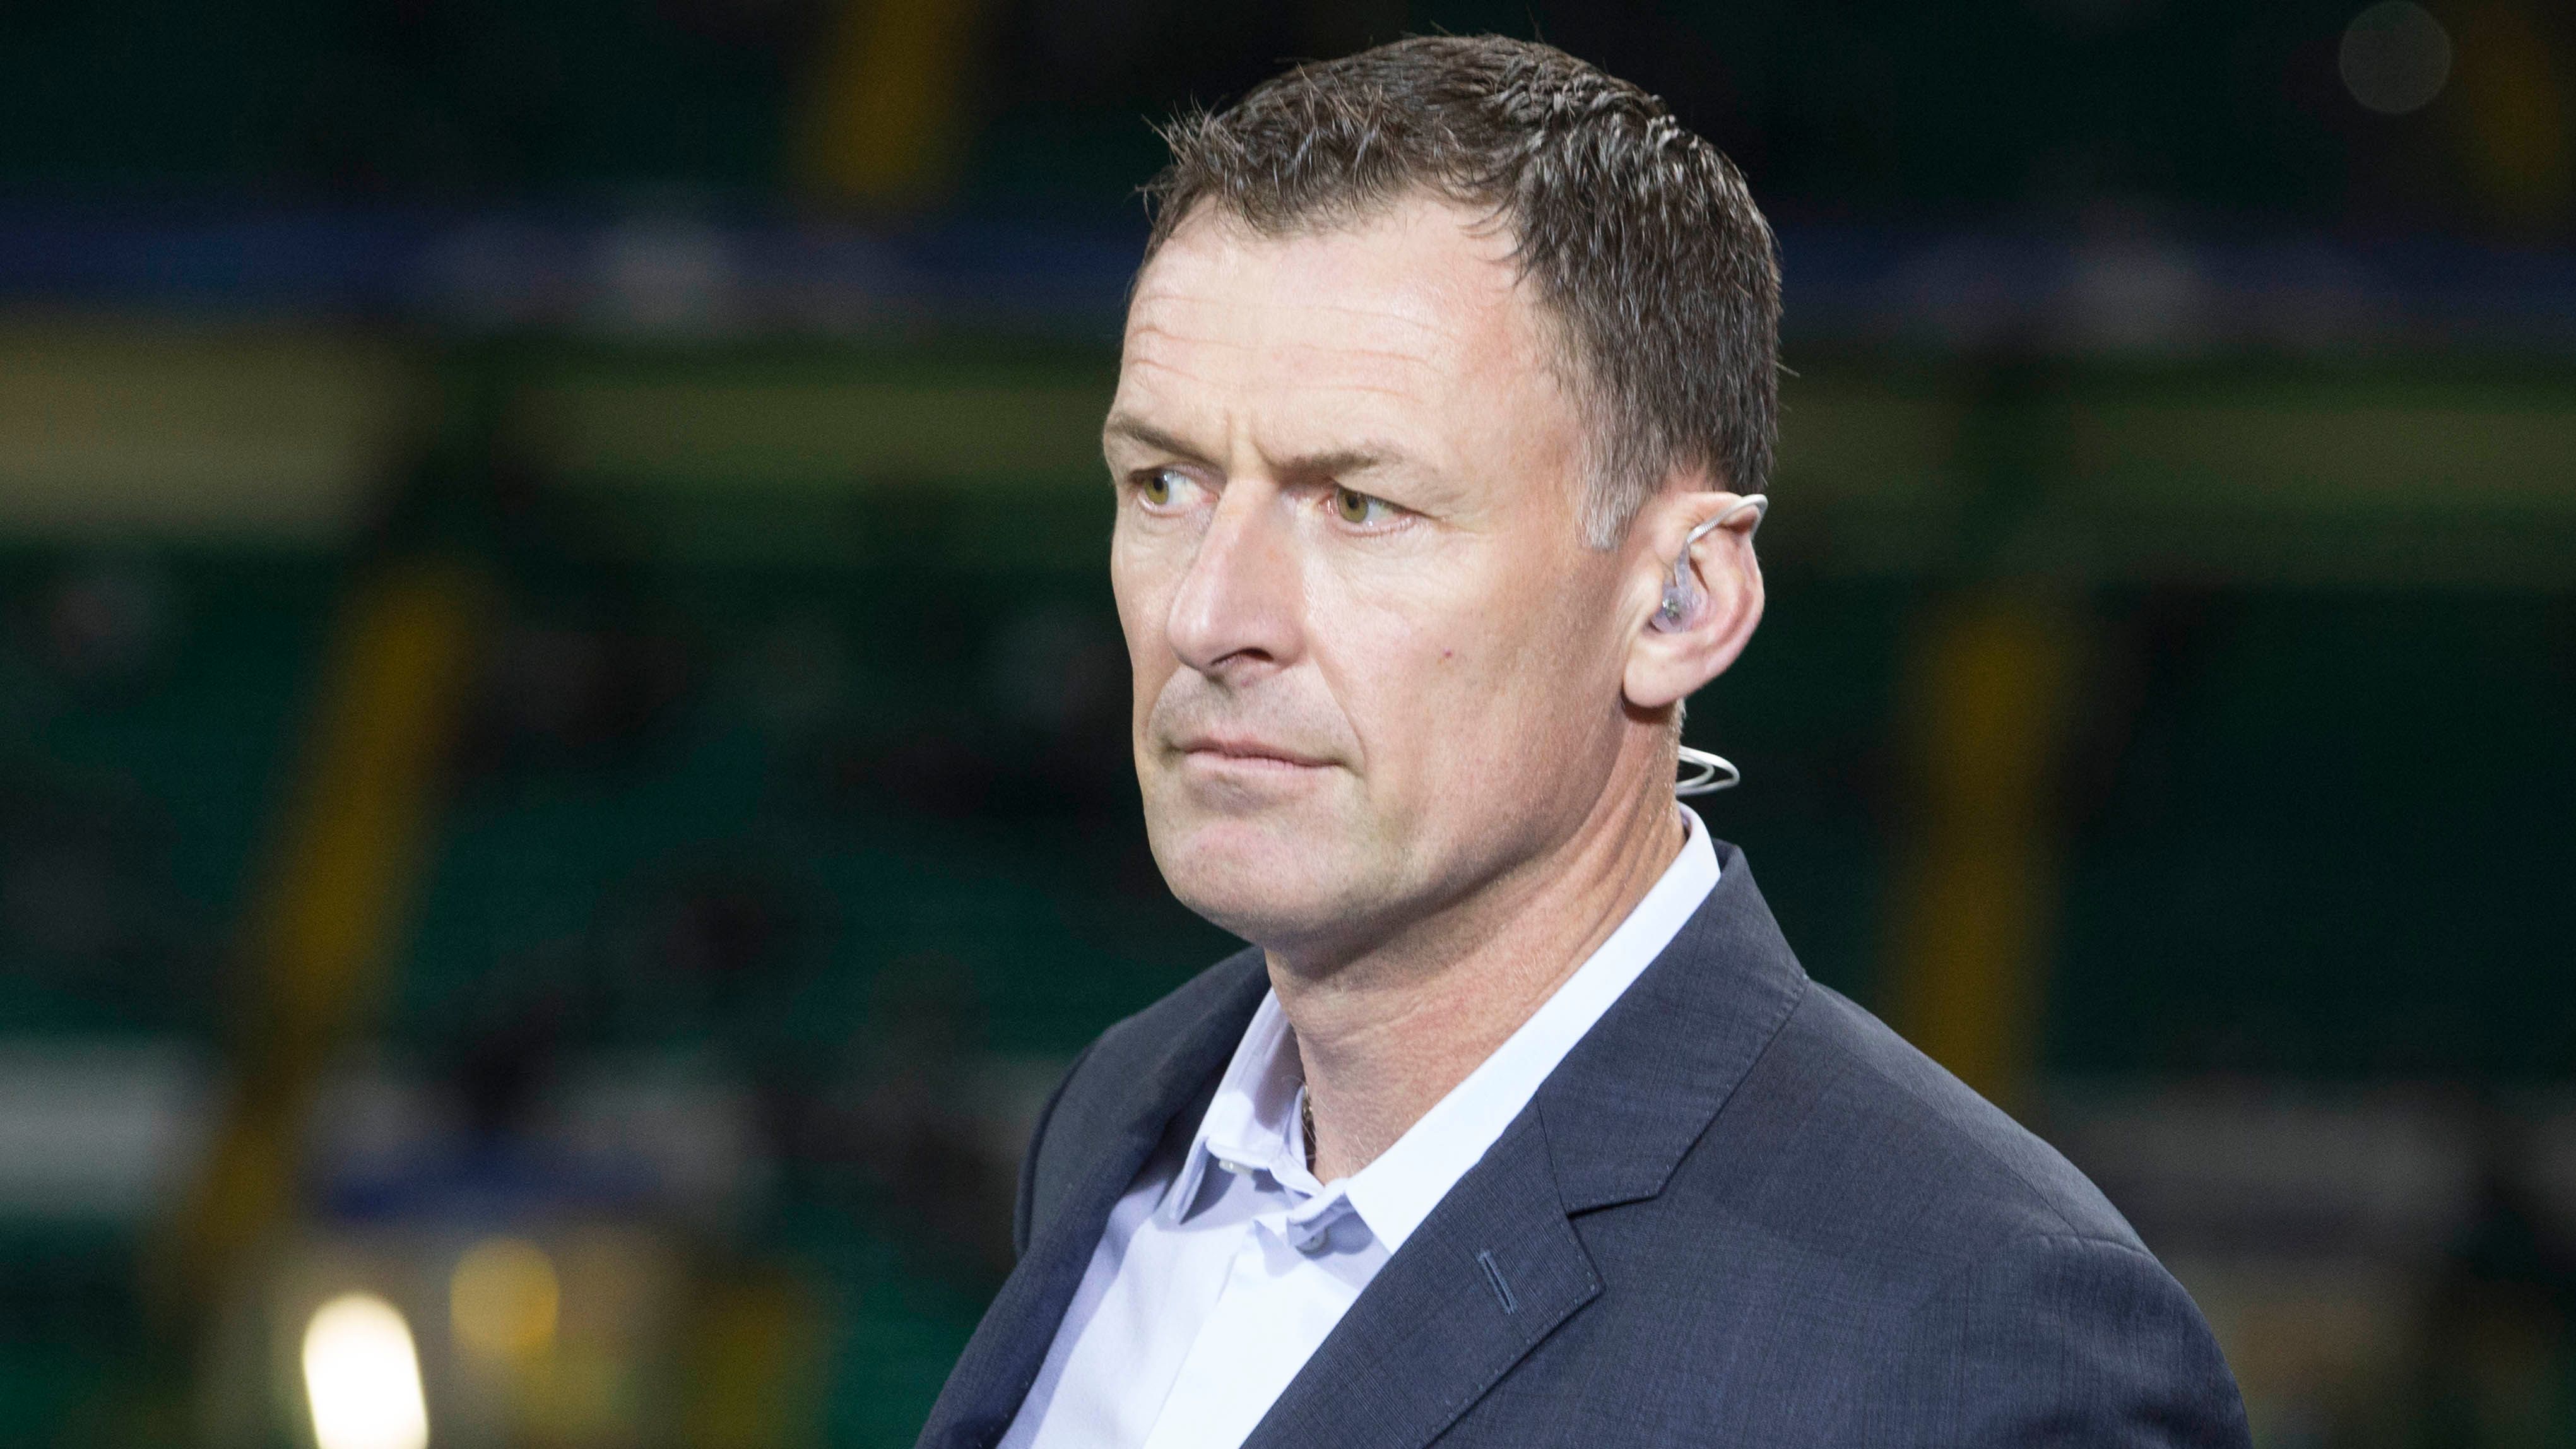 Celtic signings looks risky, says Chris Sutton | Football News - Clyde 1